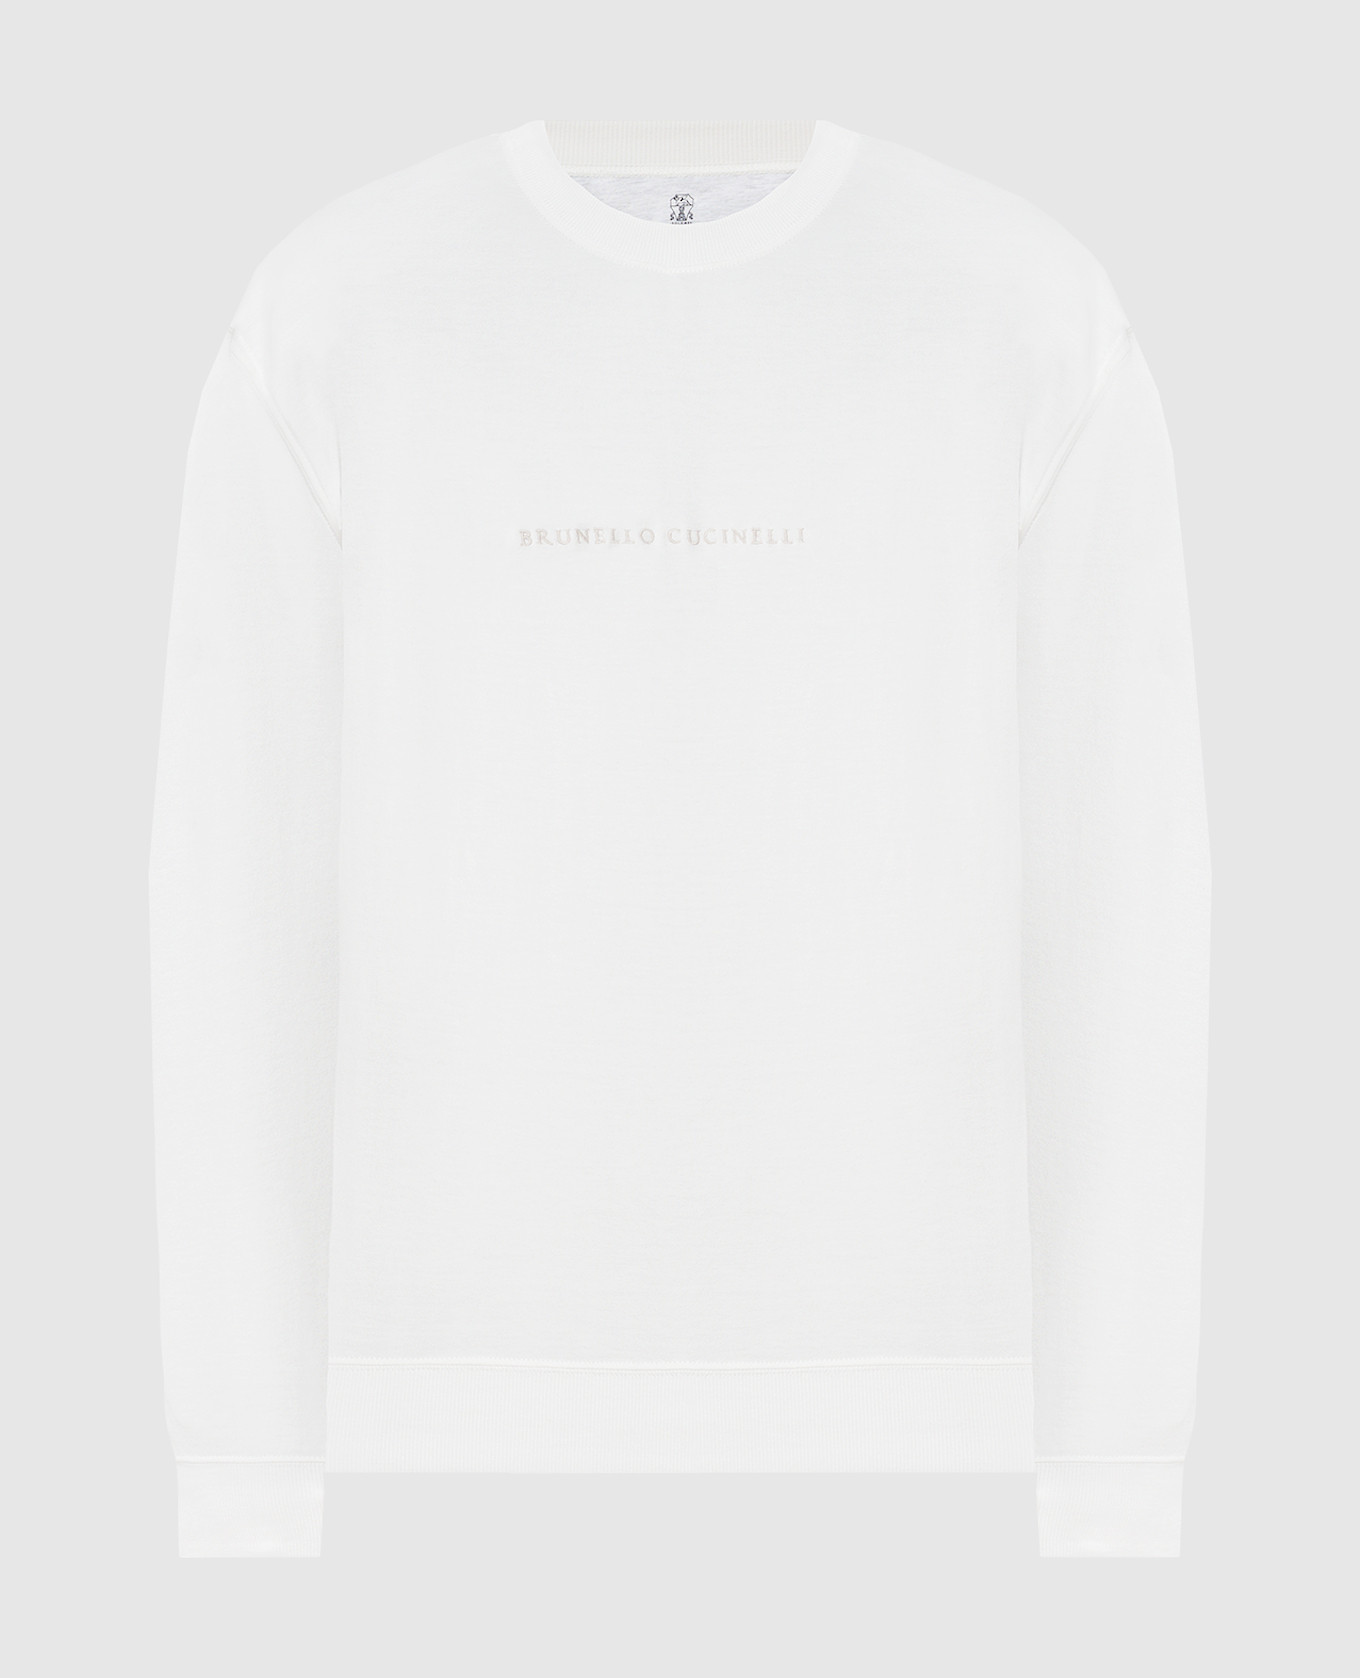 White sweatshirt with logo embroidery